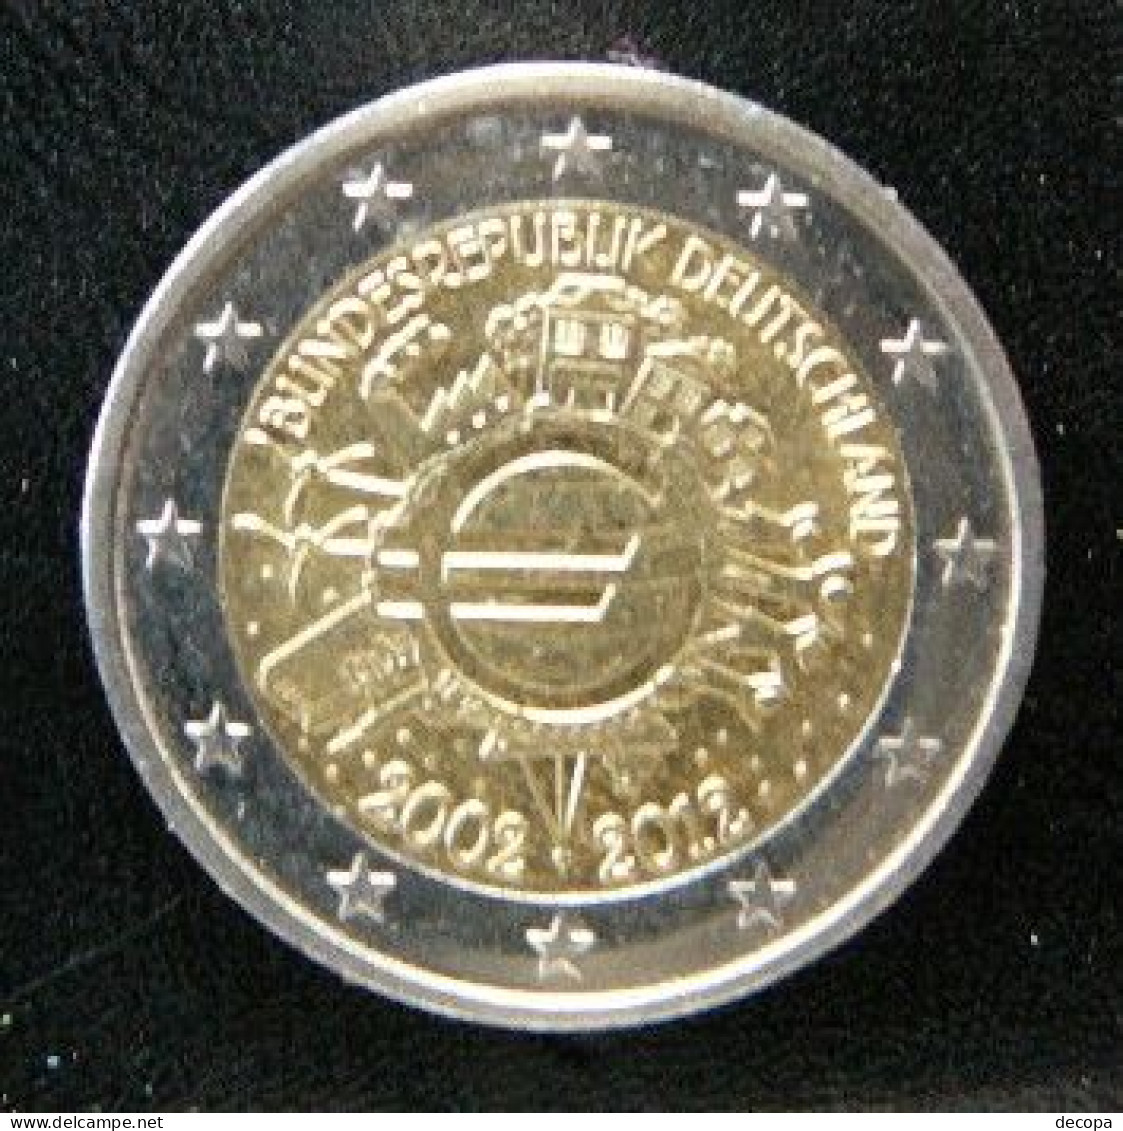 Germany - Allemagne - Duitsland   2 EURO 2012 F   10 Years Euro      Speciale Uitgave - Commemorative - Deutschland